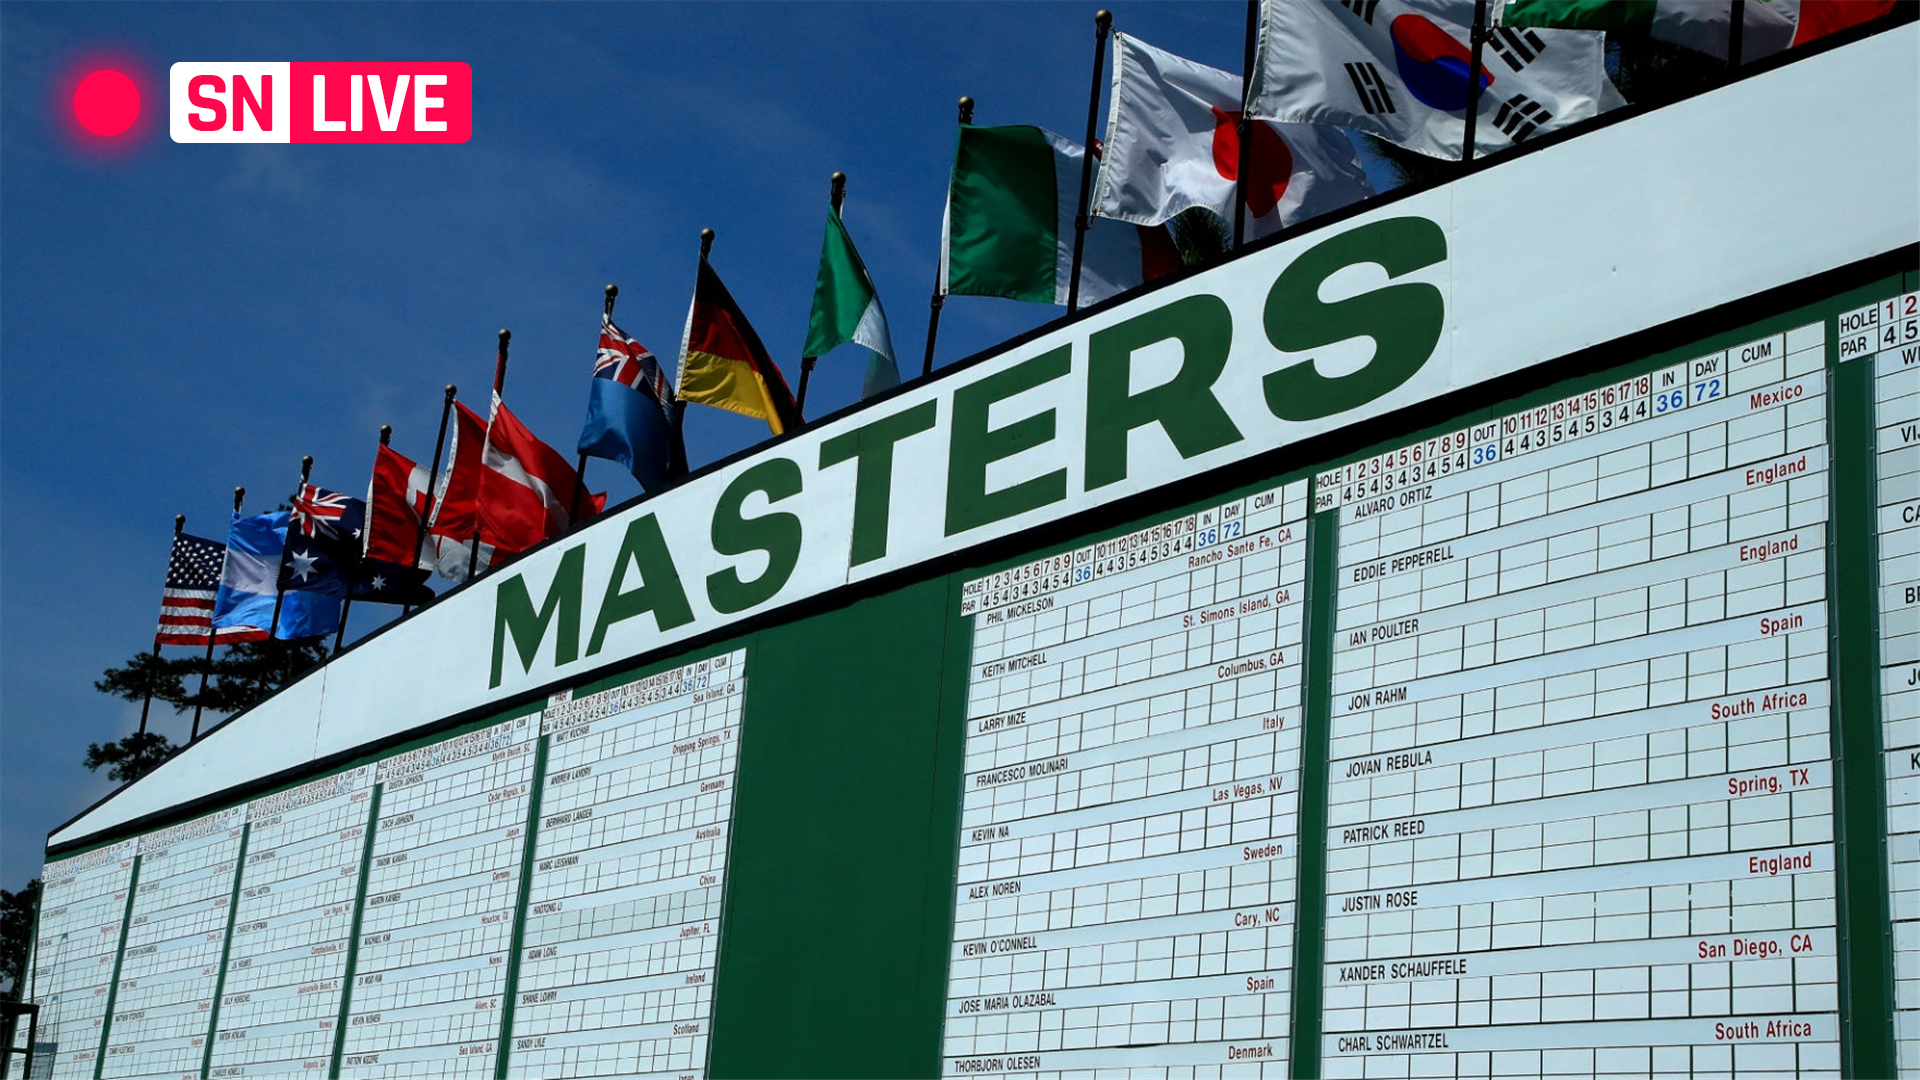 Masters leaderboard 2019 Live golf scores, results from Sunday's Round